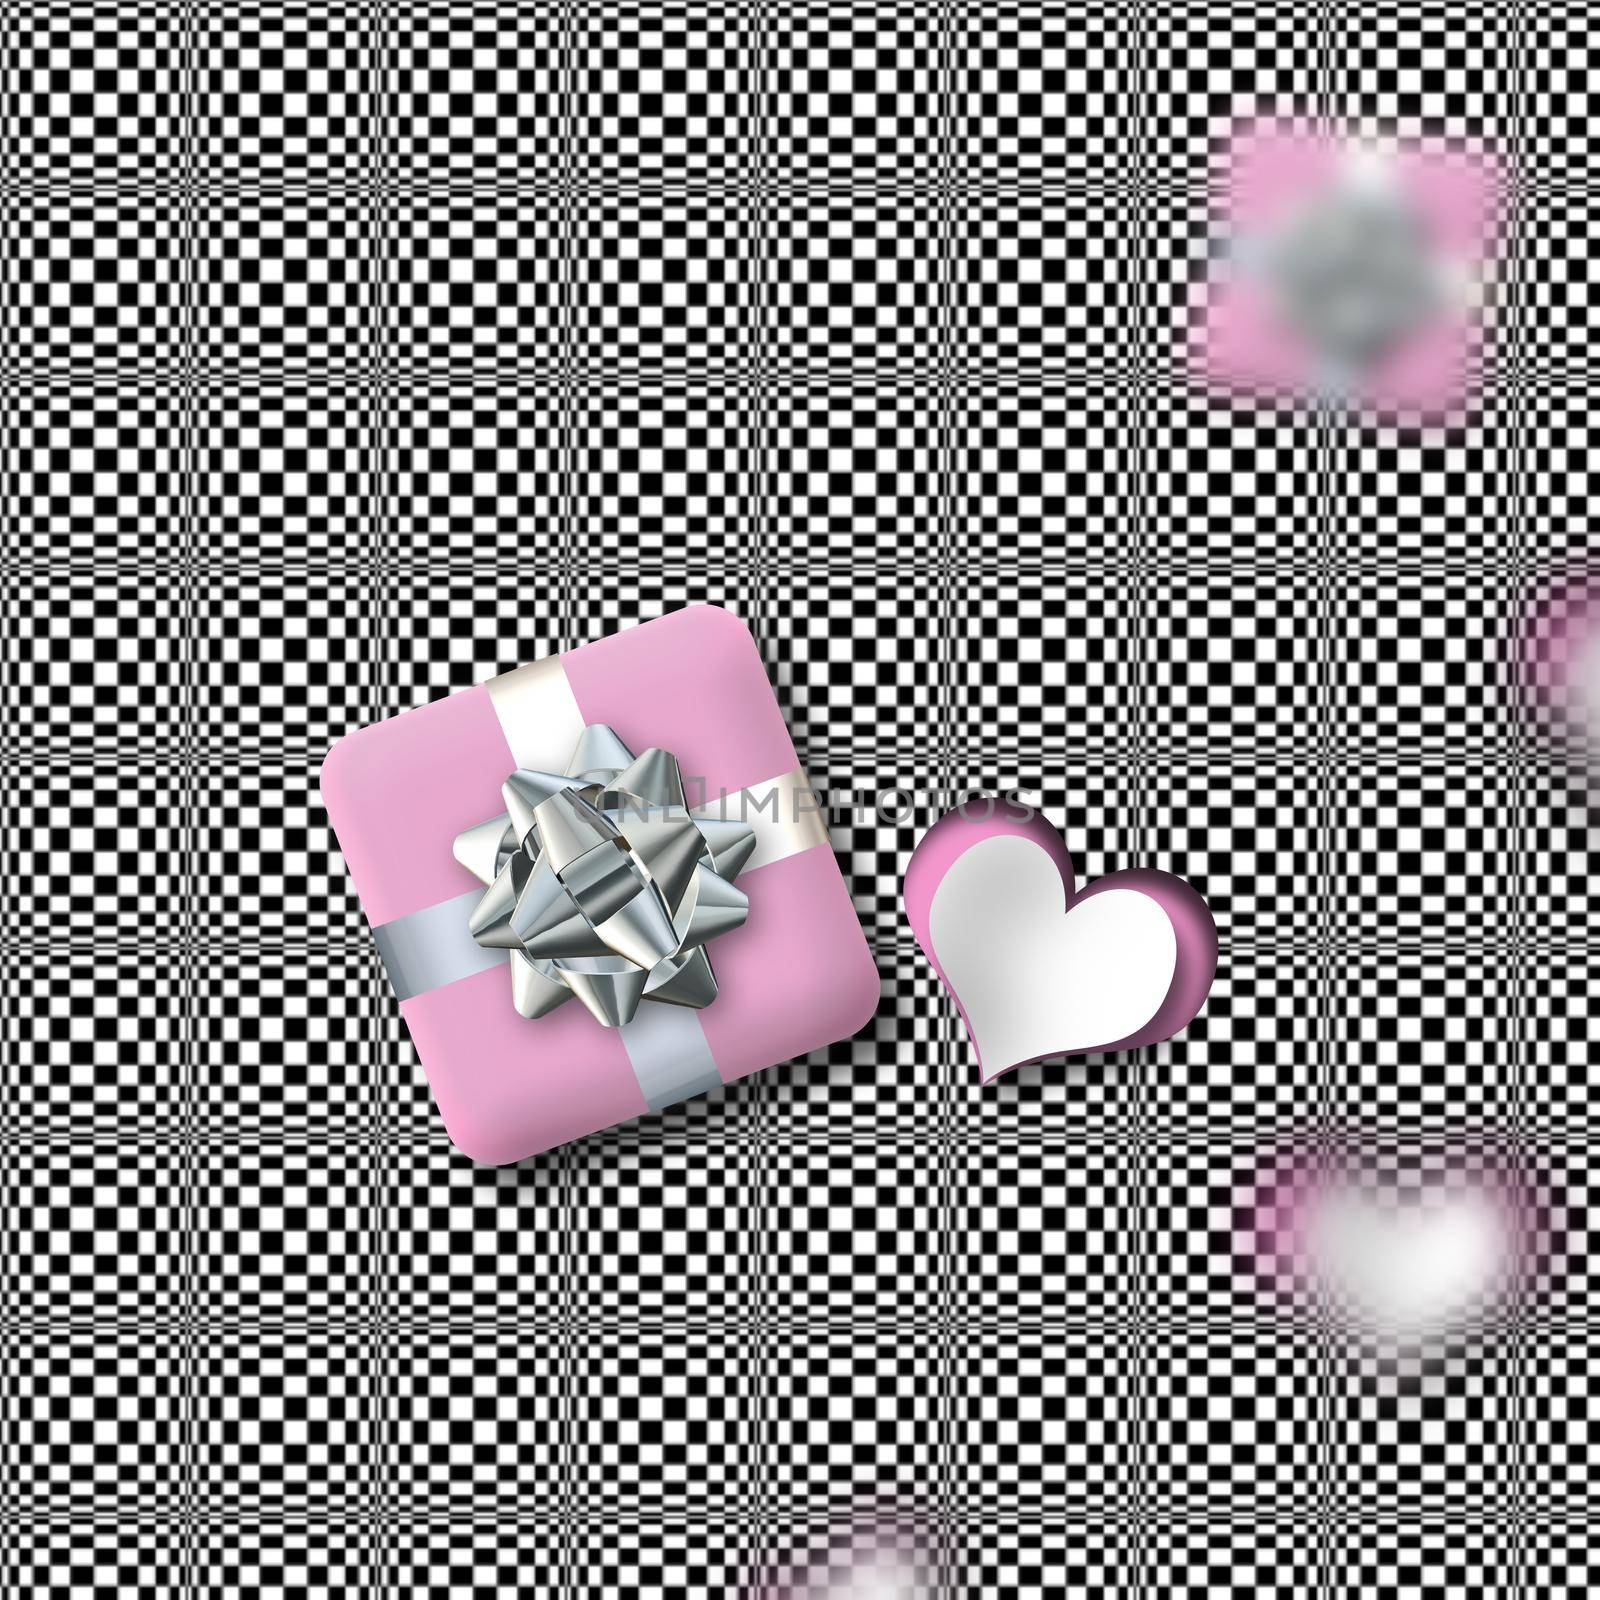 Modern Valentine's card with pink heart, gift box on grey abstract background. 3D illustration